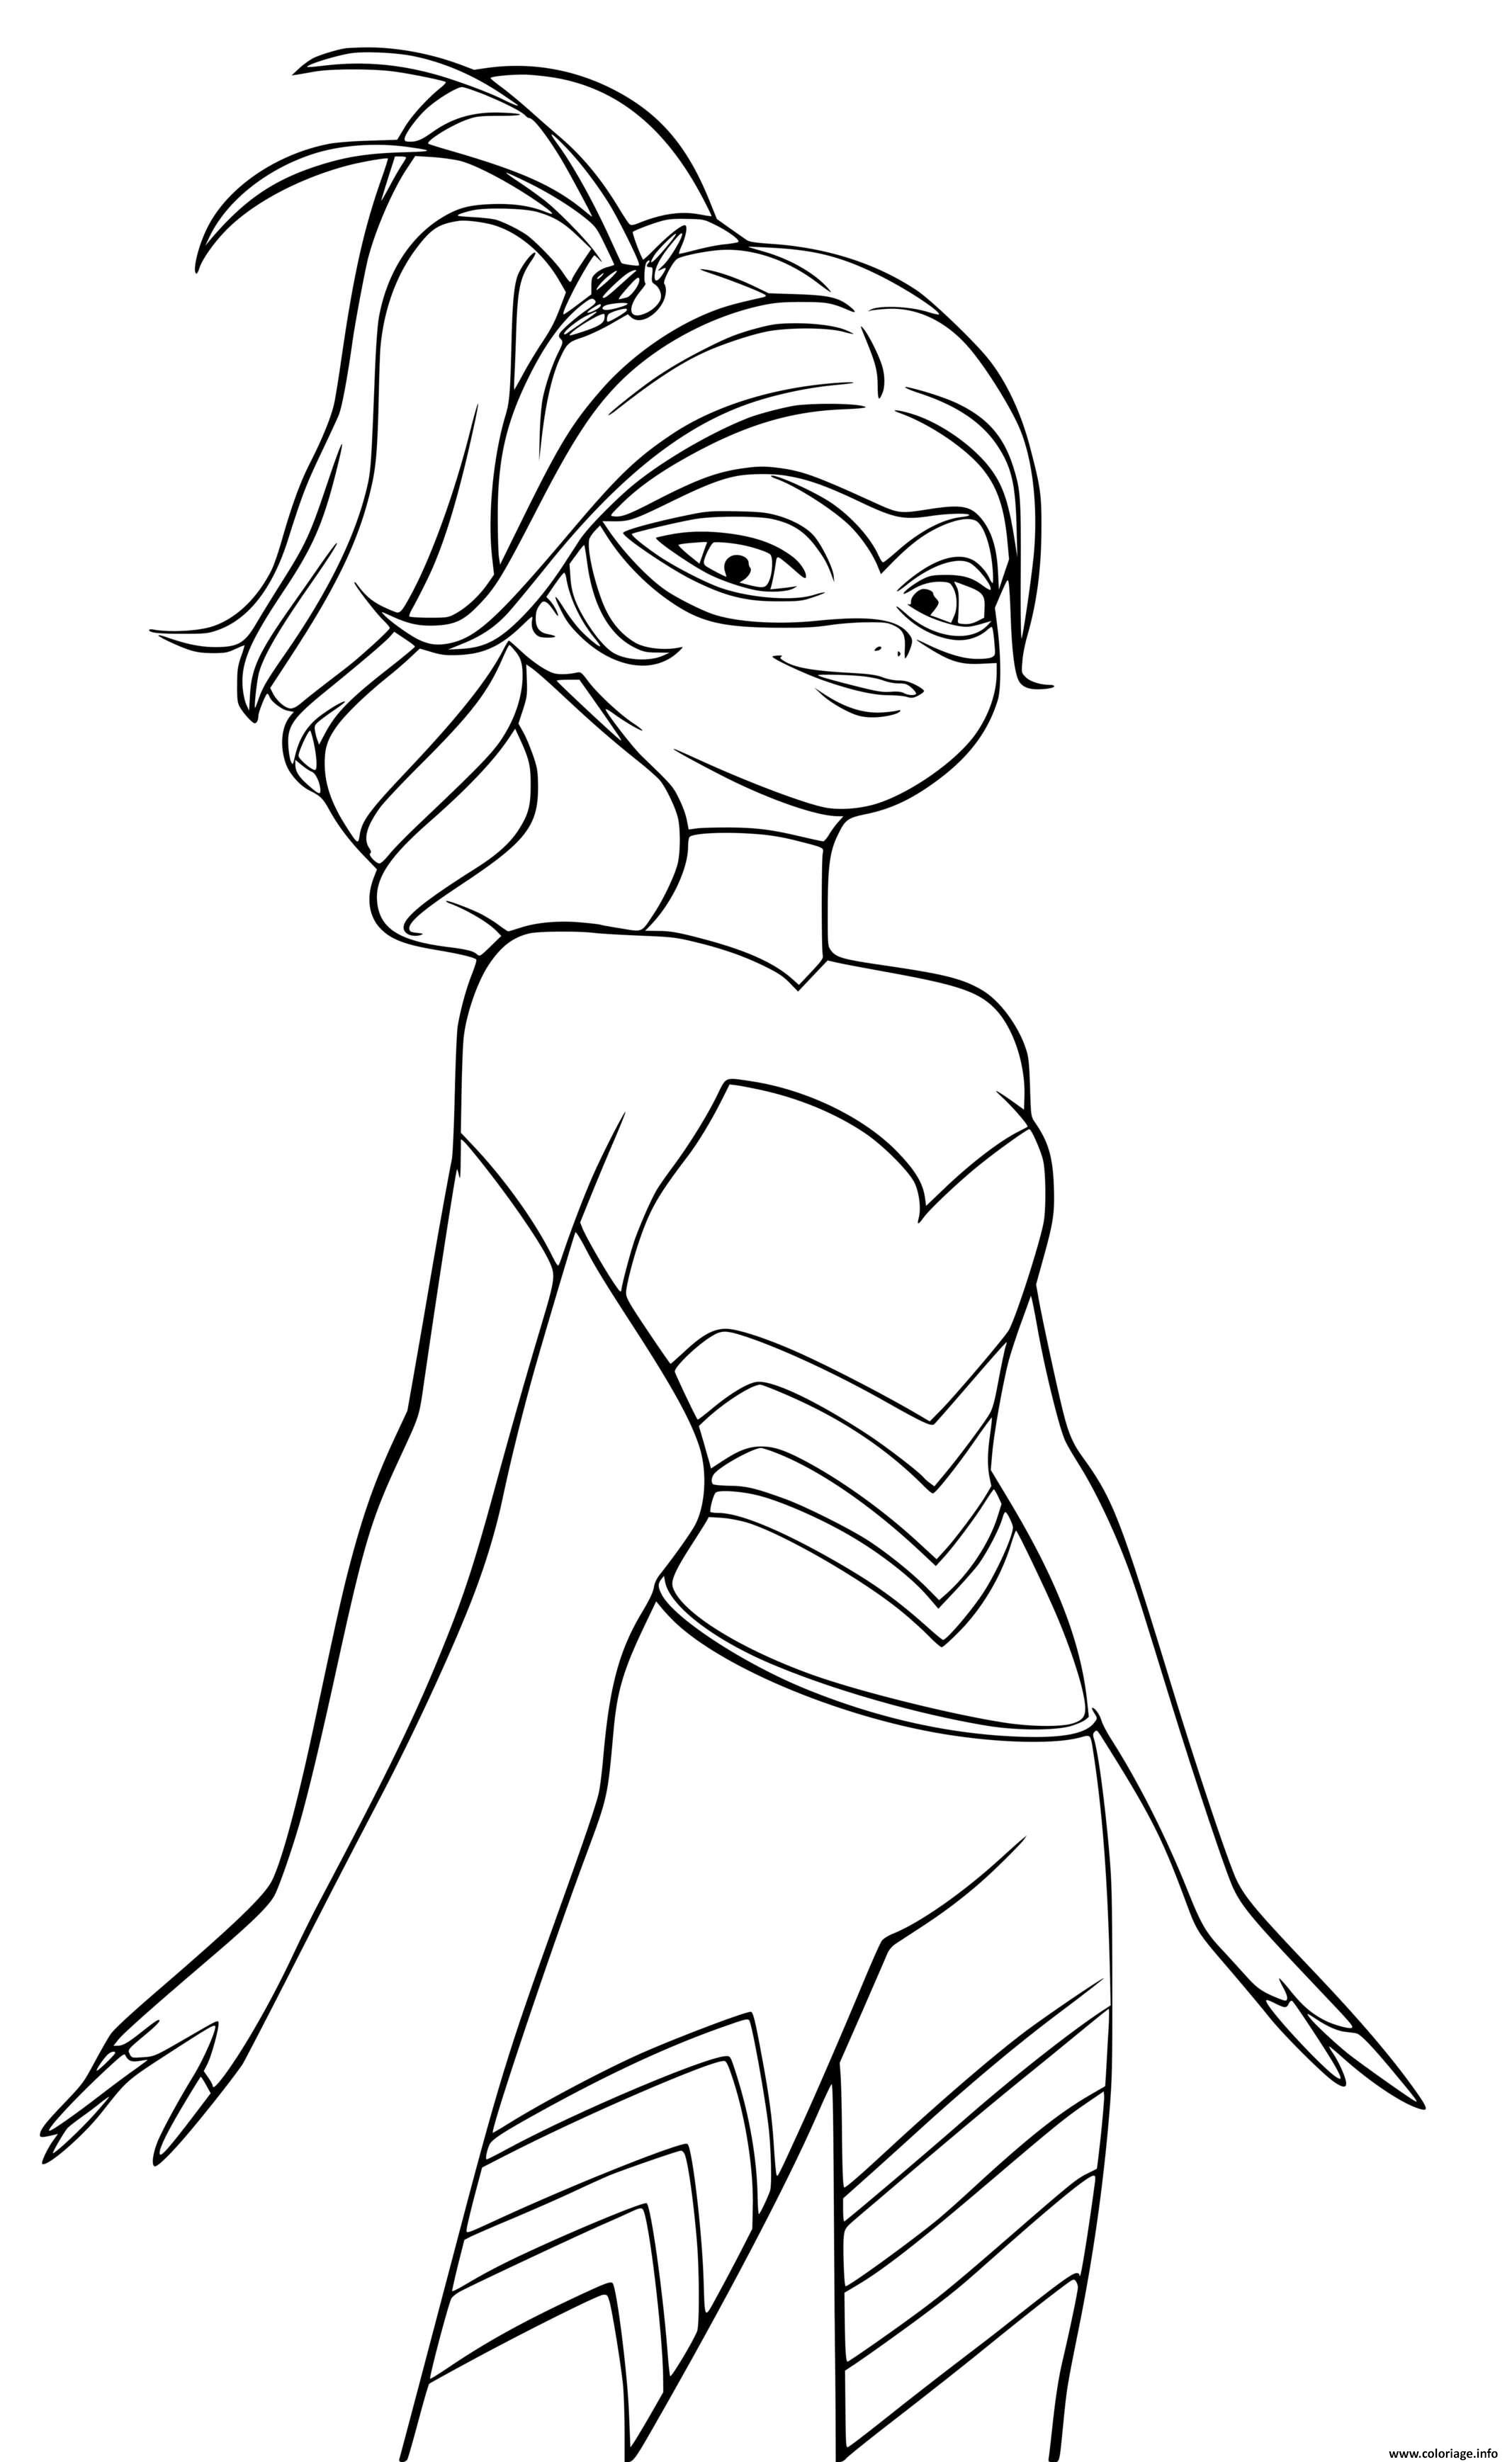 Coloriage Miraculous Ladybug Queen Bee Or Chloes Dessin Ladybug Miraculous A Imprimer